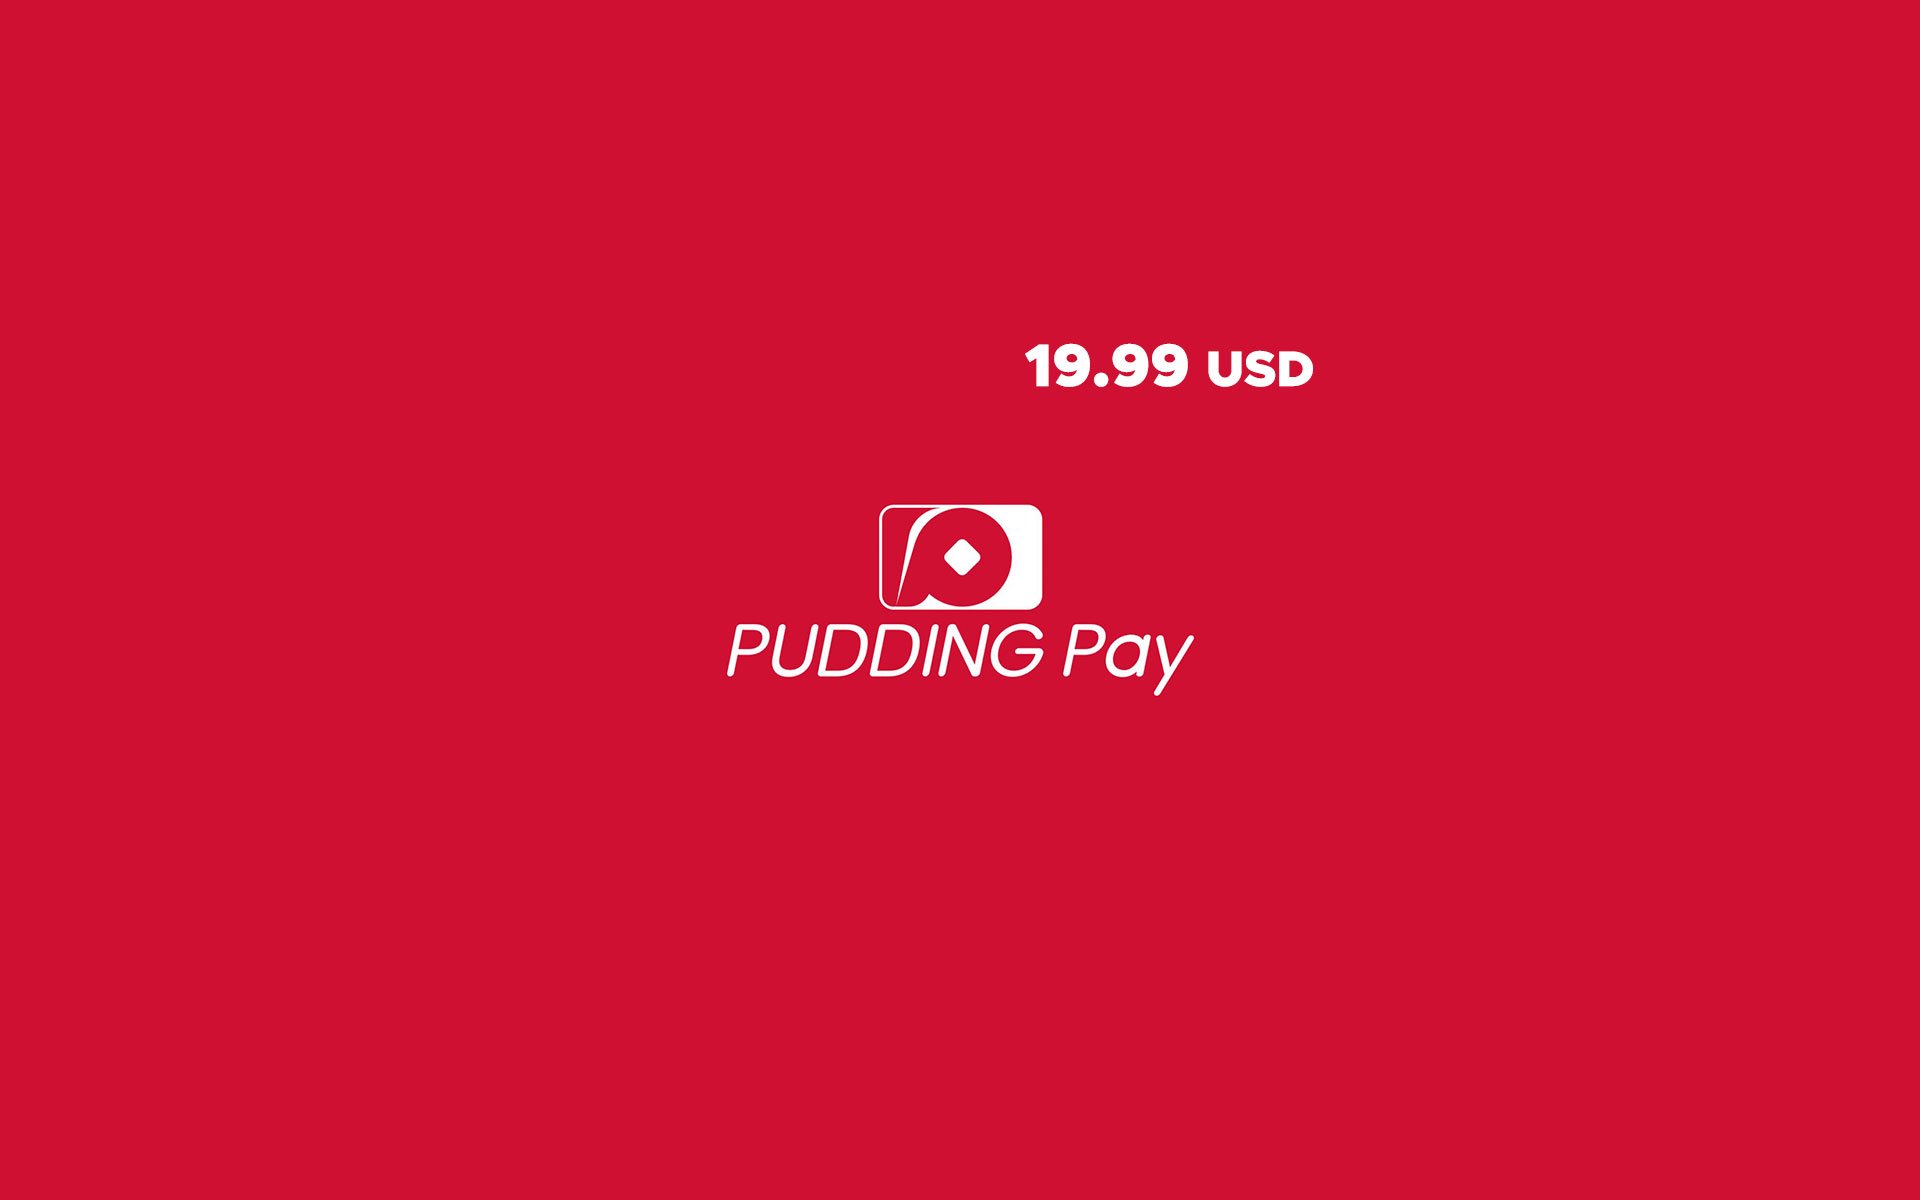 19.99 USD Pudding Pay